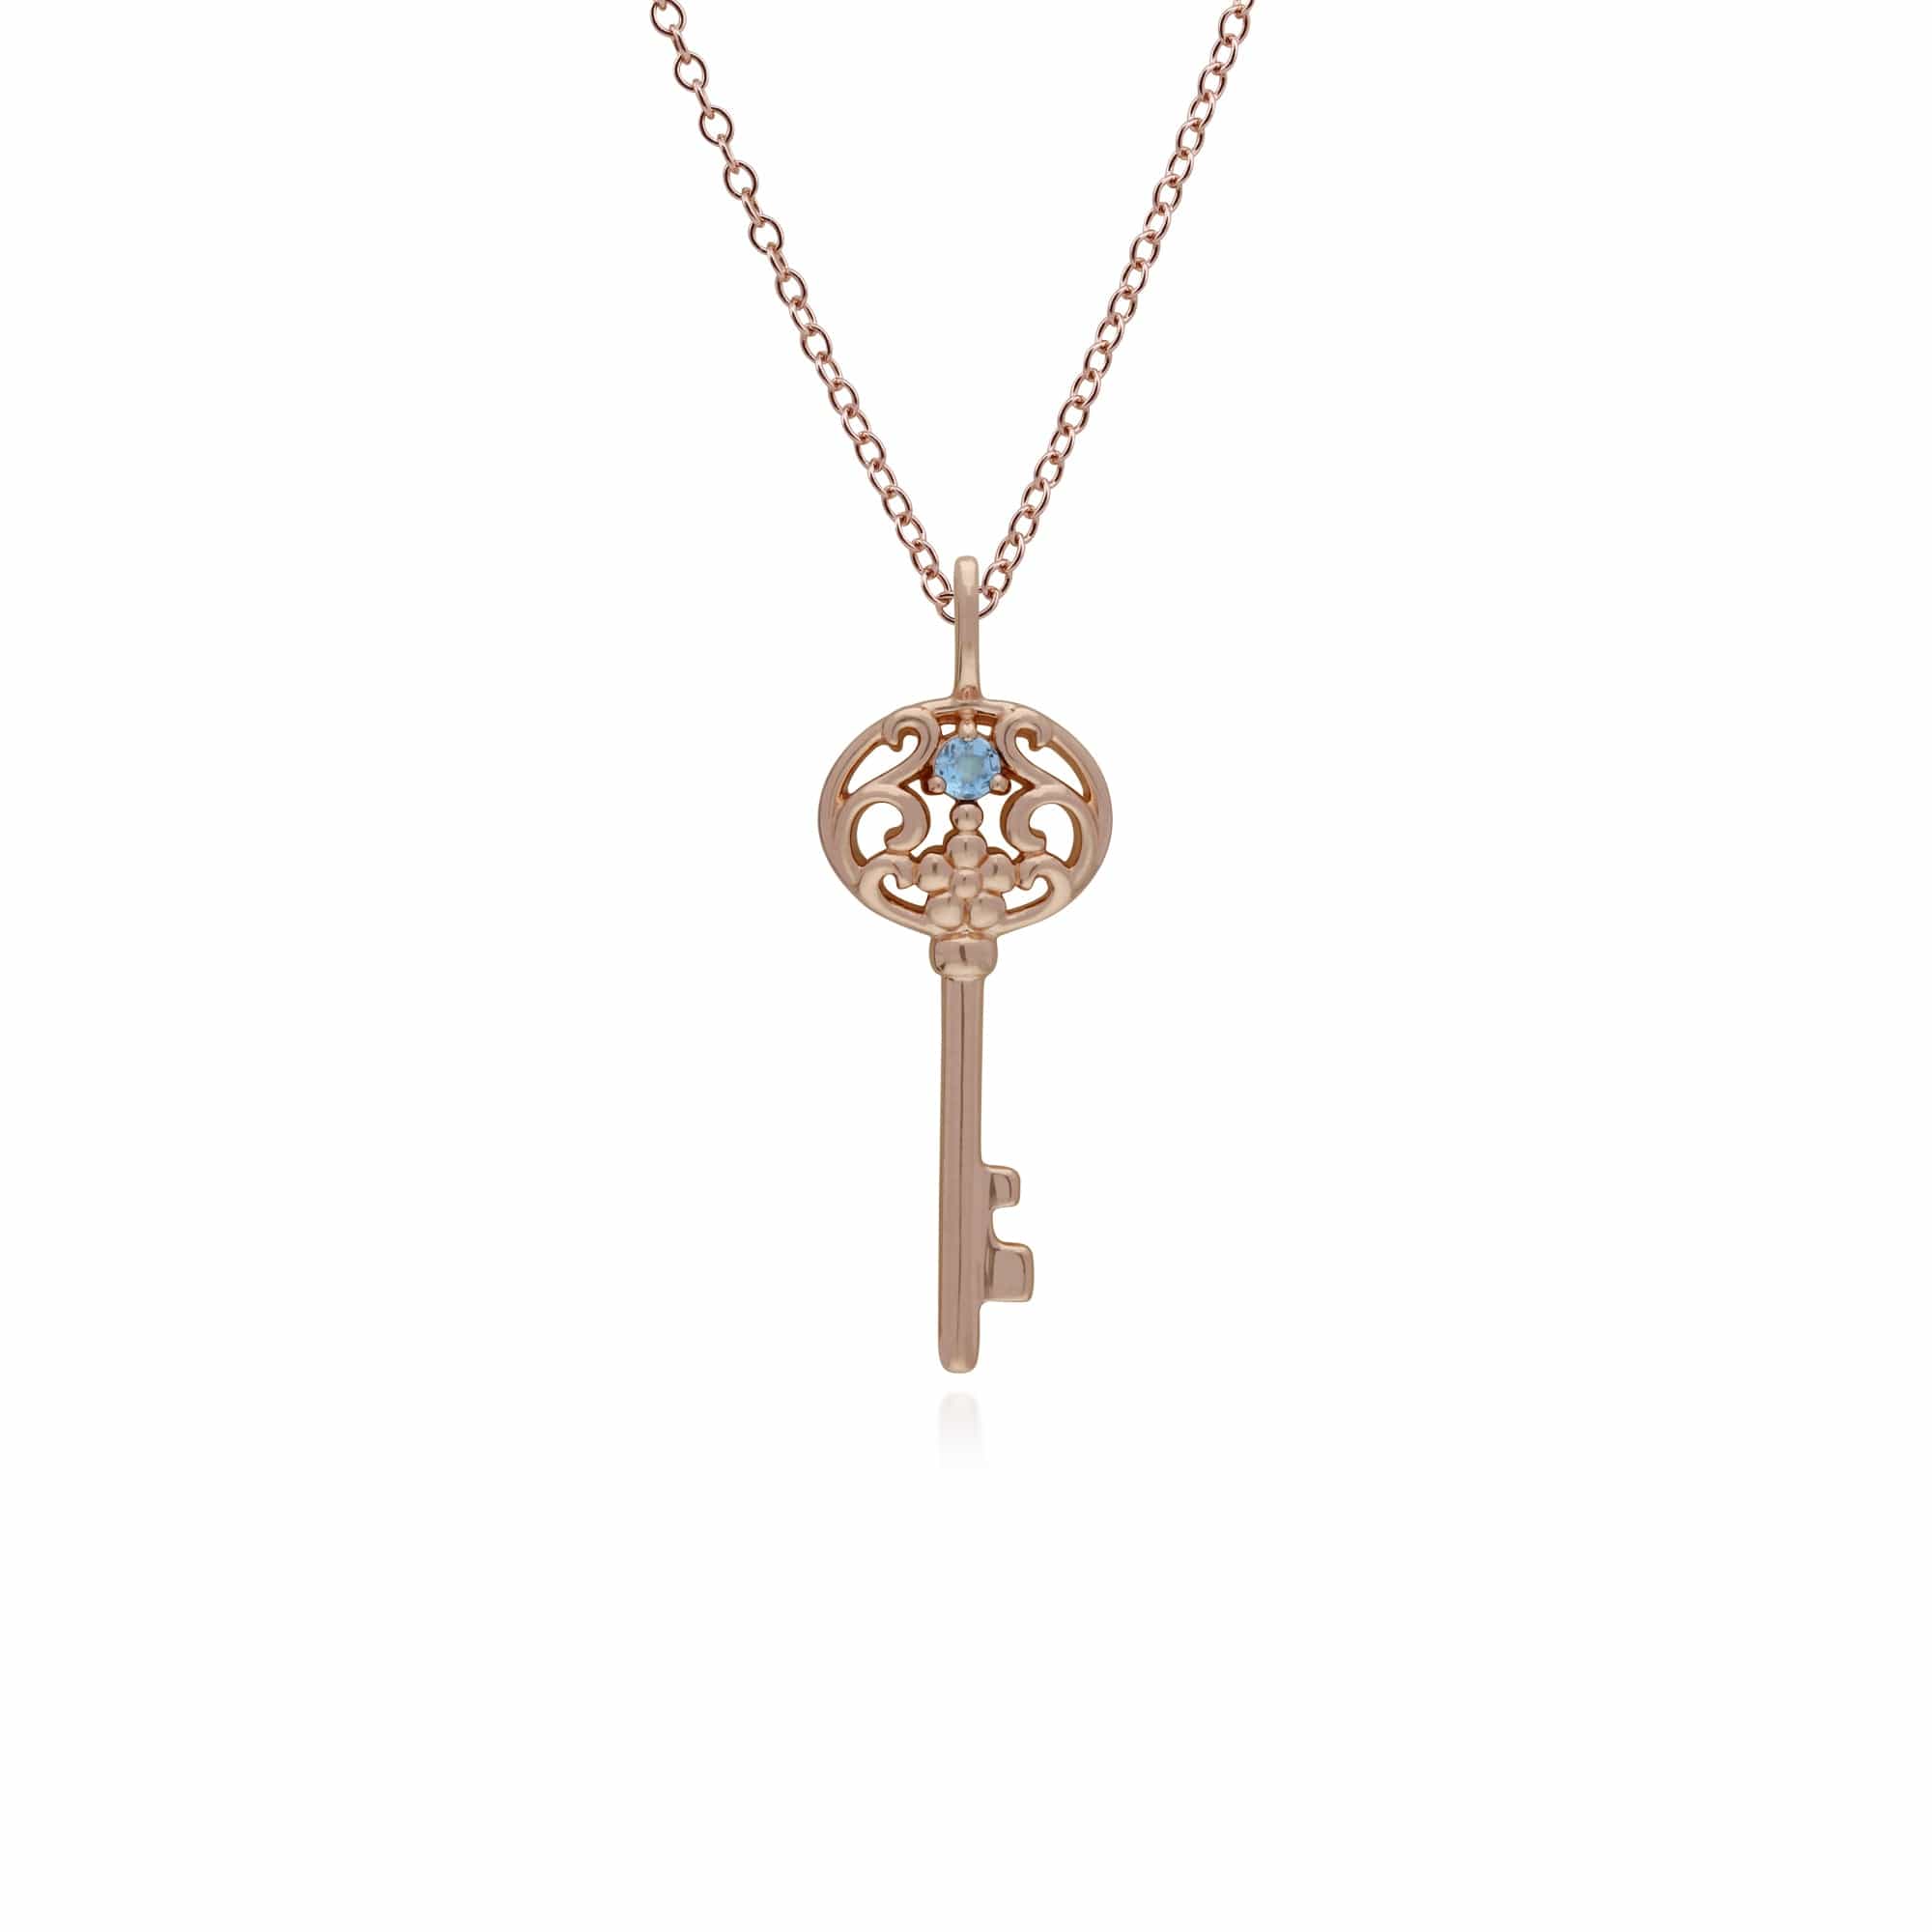 270P026710925-270P026901925 Classic Heart Lock Pendant & Aquamarine Big Key Charm in Rose Gold Plated 925 Sterling Silver 2